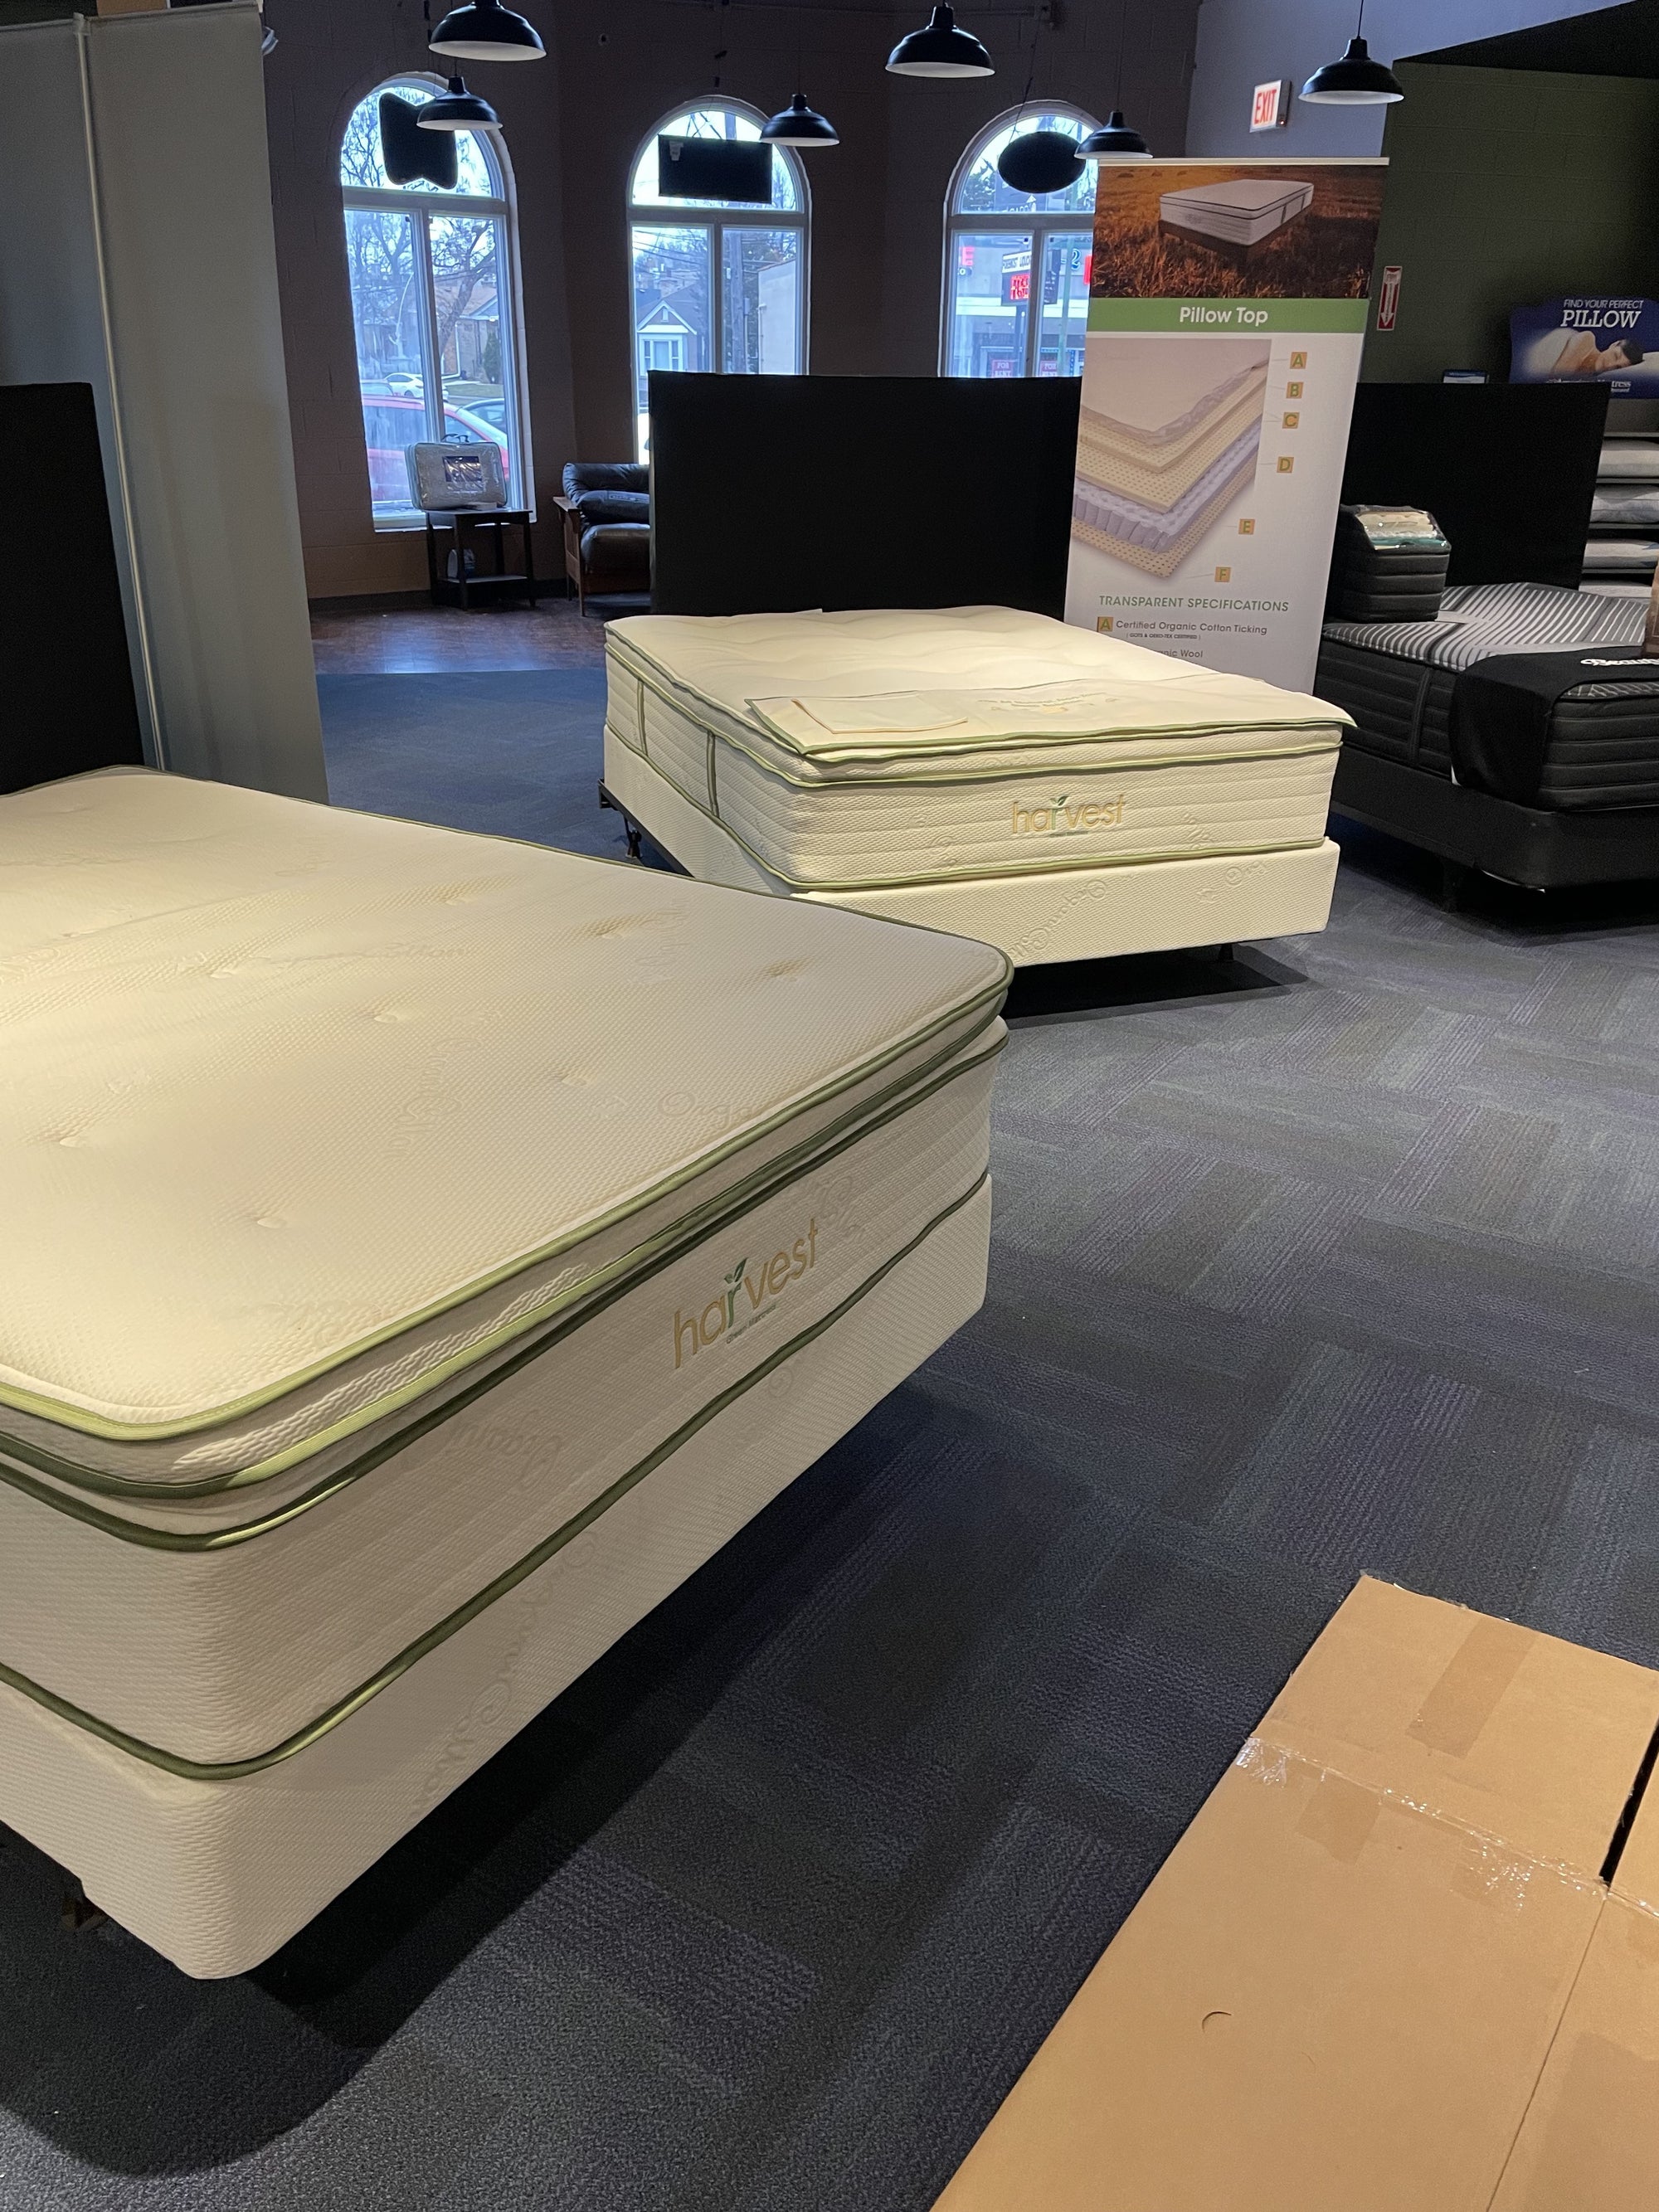 American-Mattress-Harvest-Green-Mattress-Experience-Center-in-6000-N-Lincoln-Ave-Chicago-IL-60659-In-Store-Display